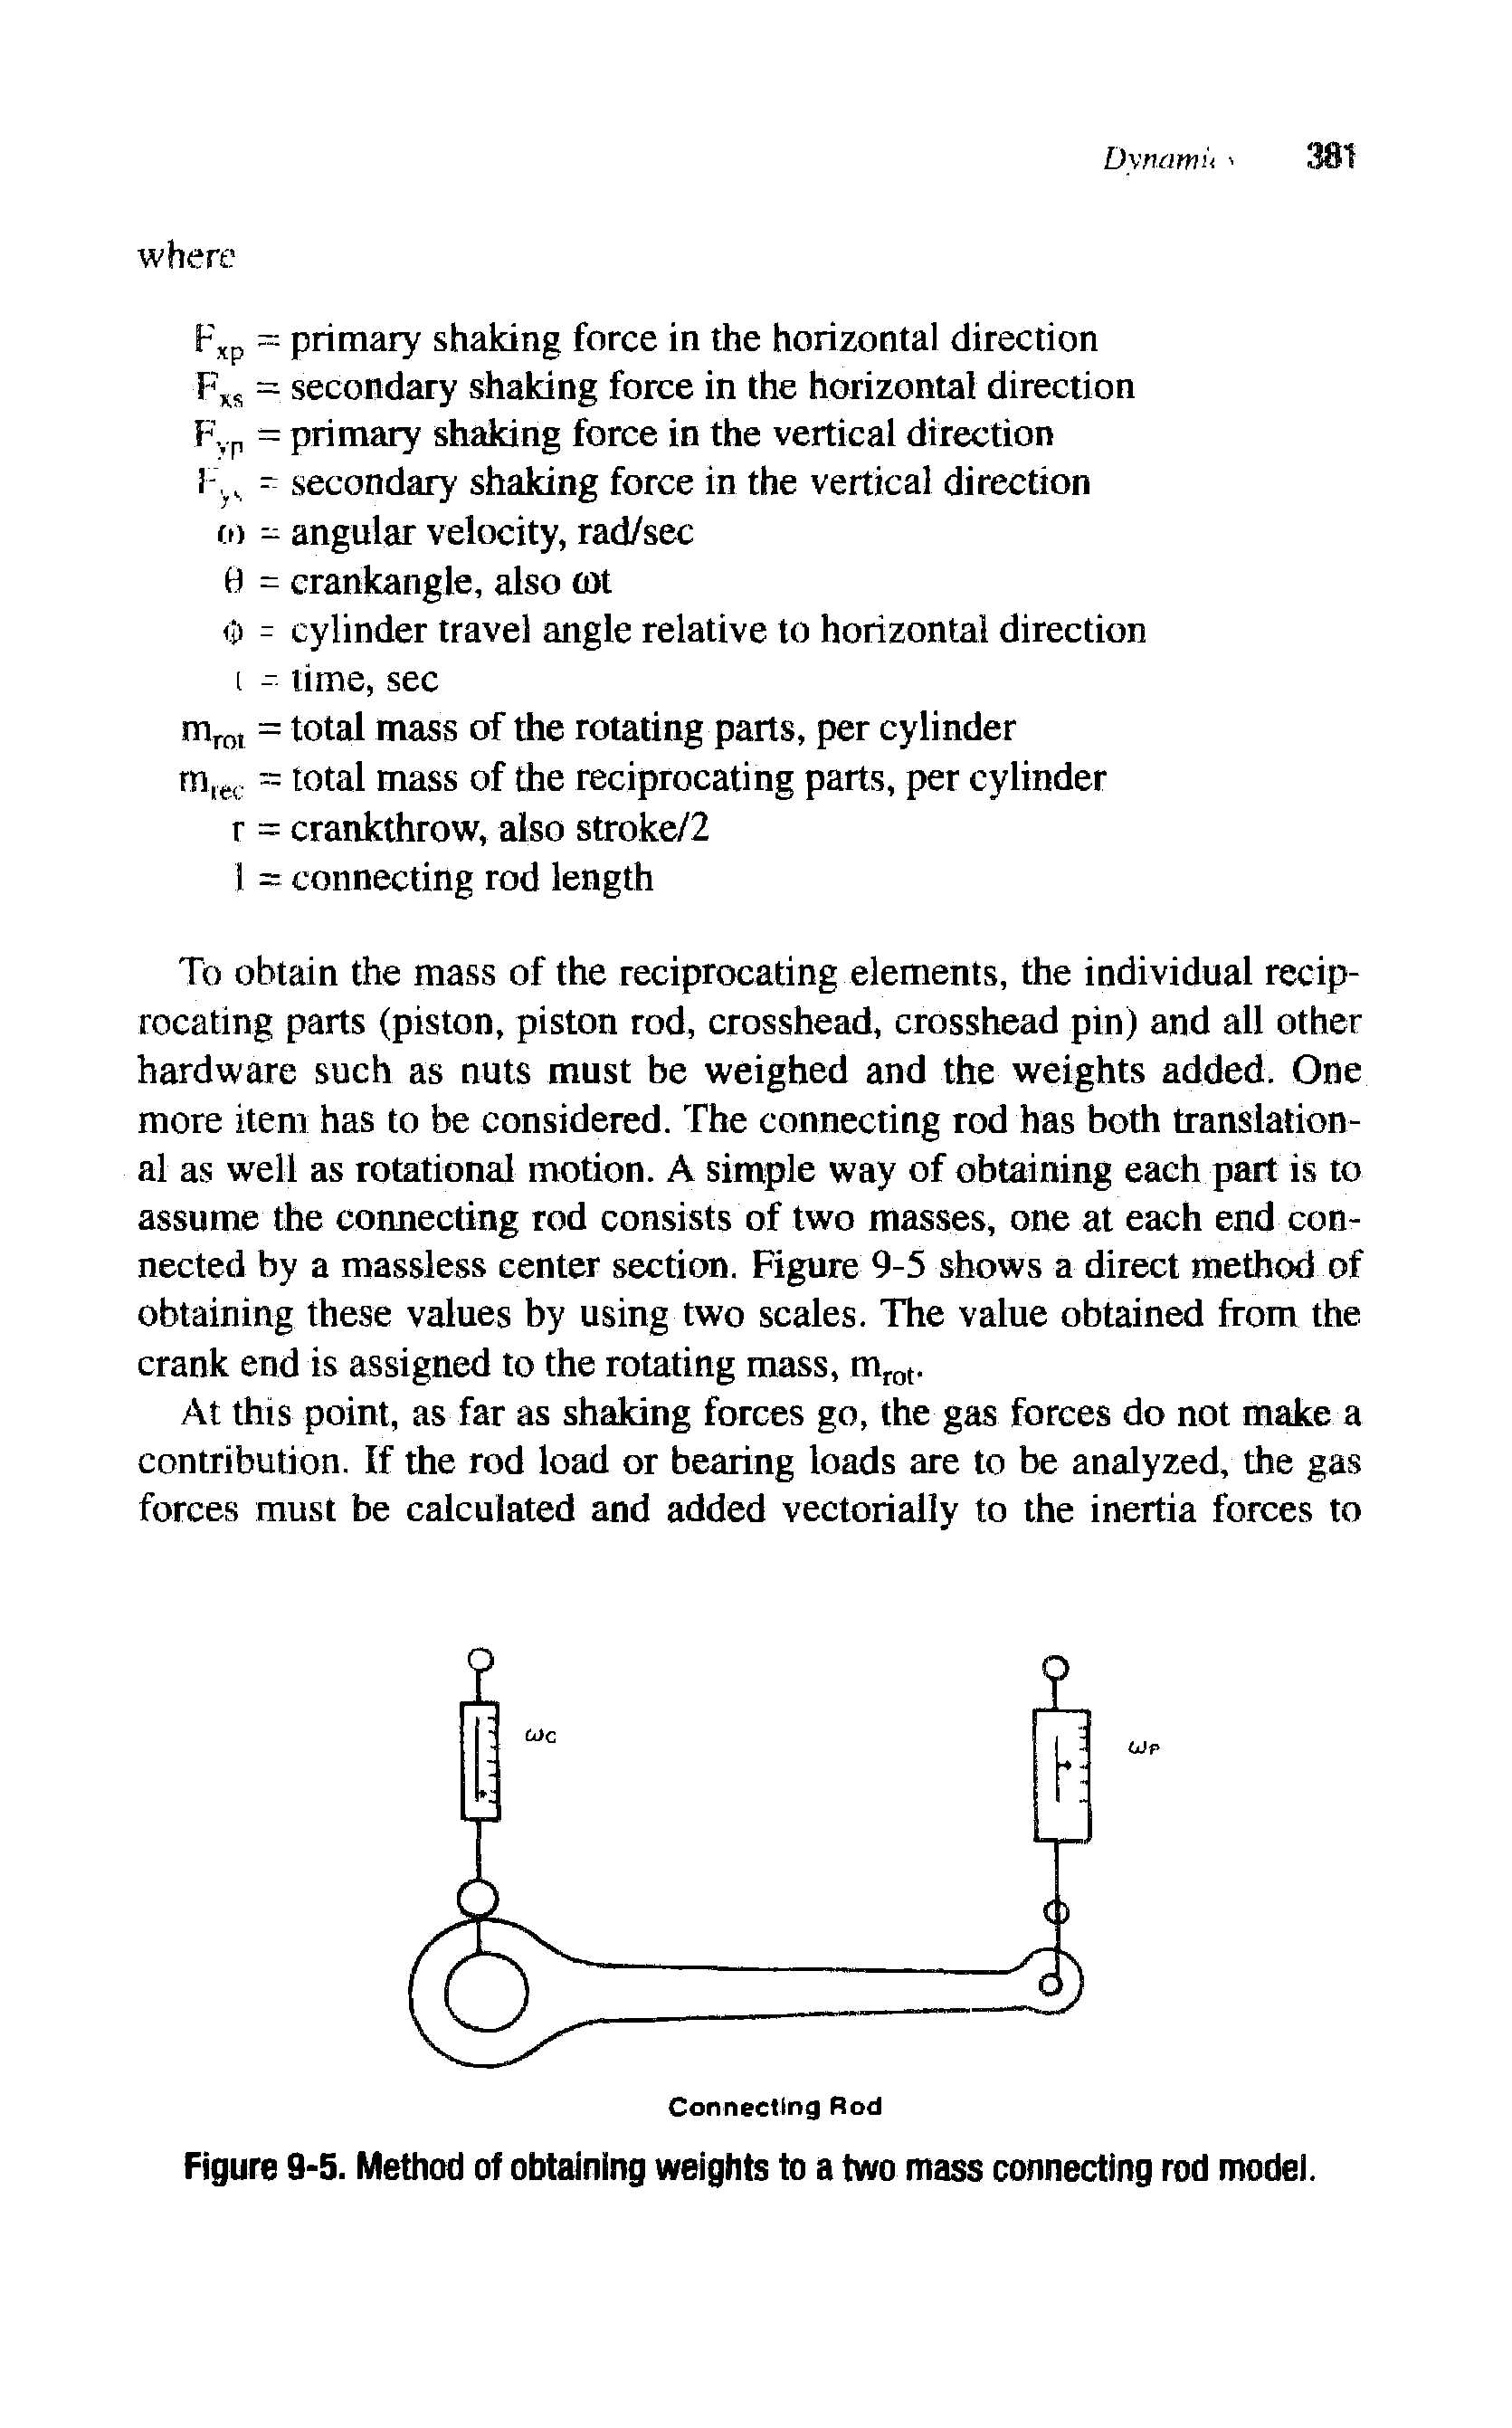 Figure 9-5. Method of obtaining weights to a two mass connecting rod modei.